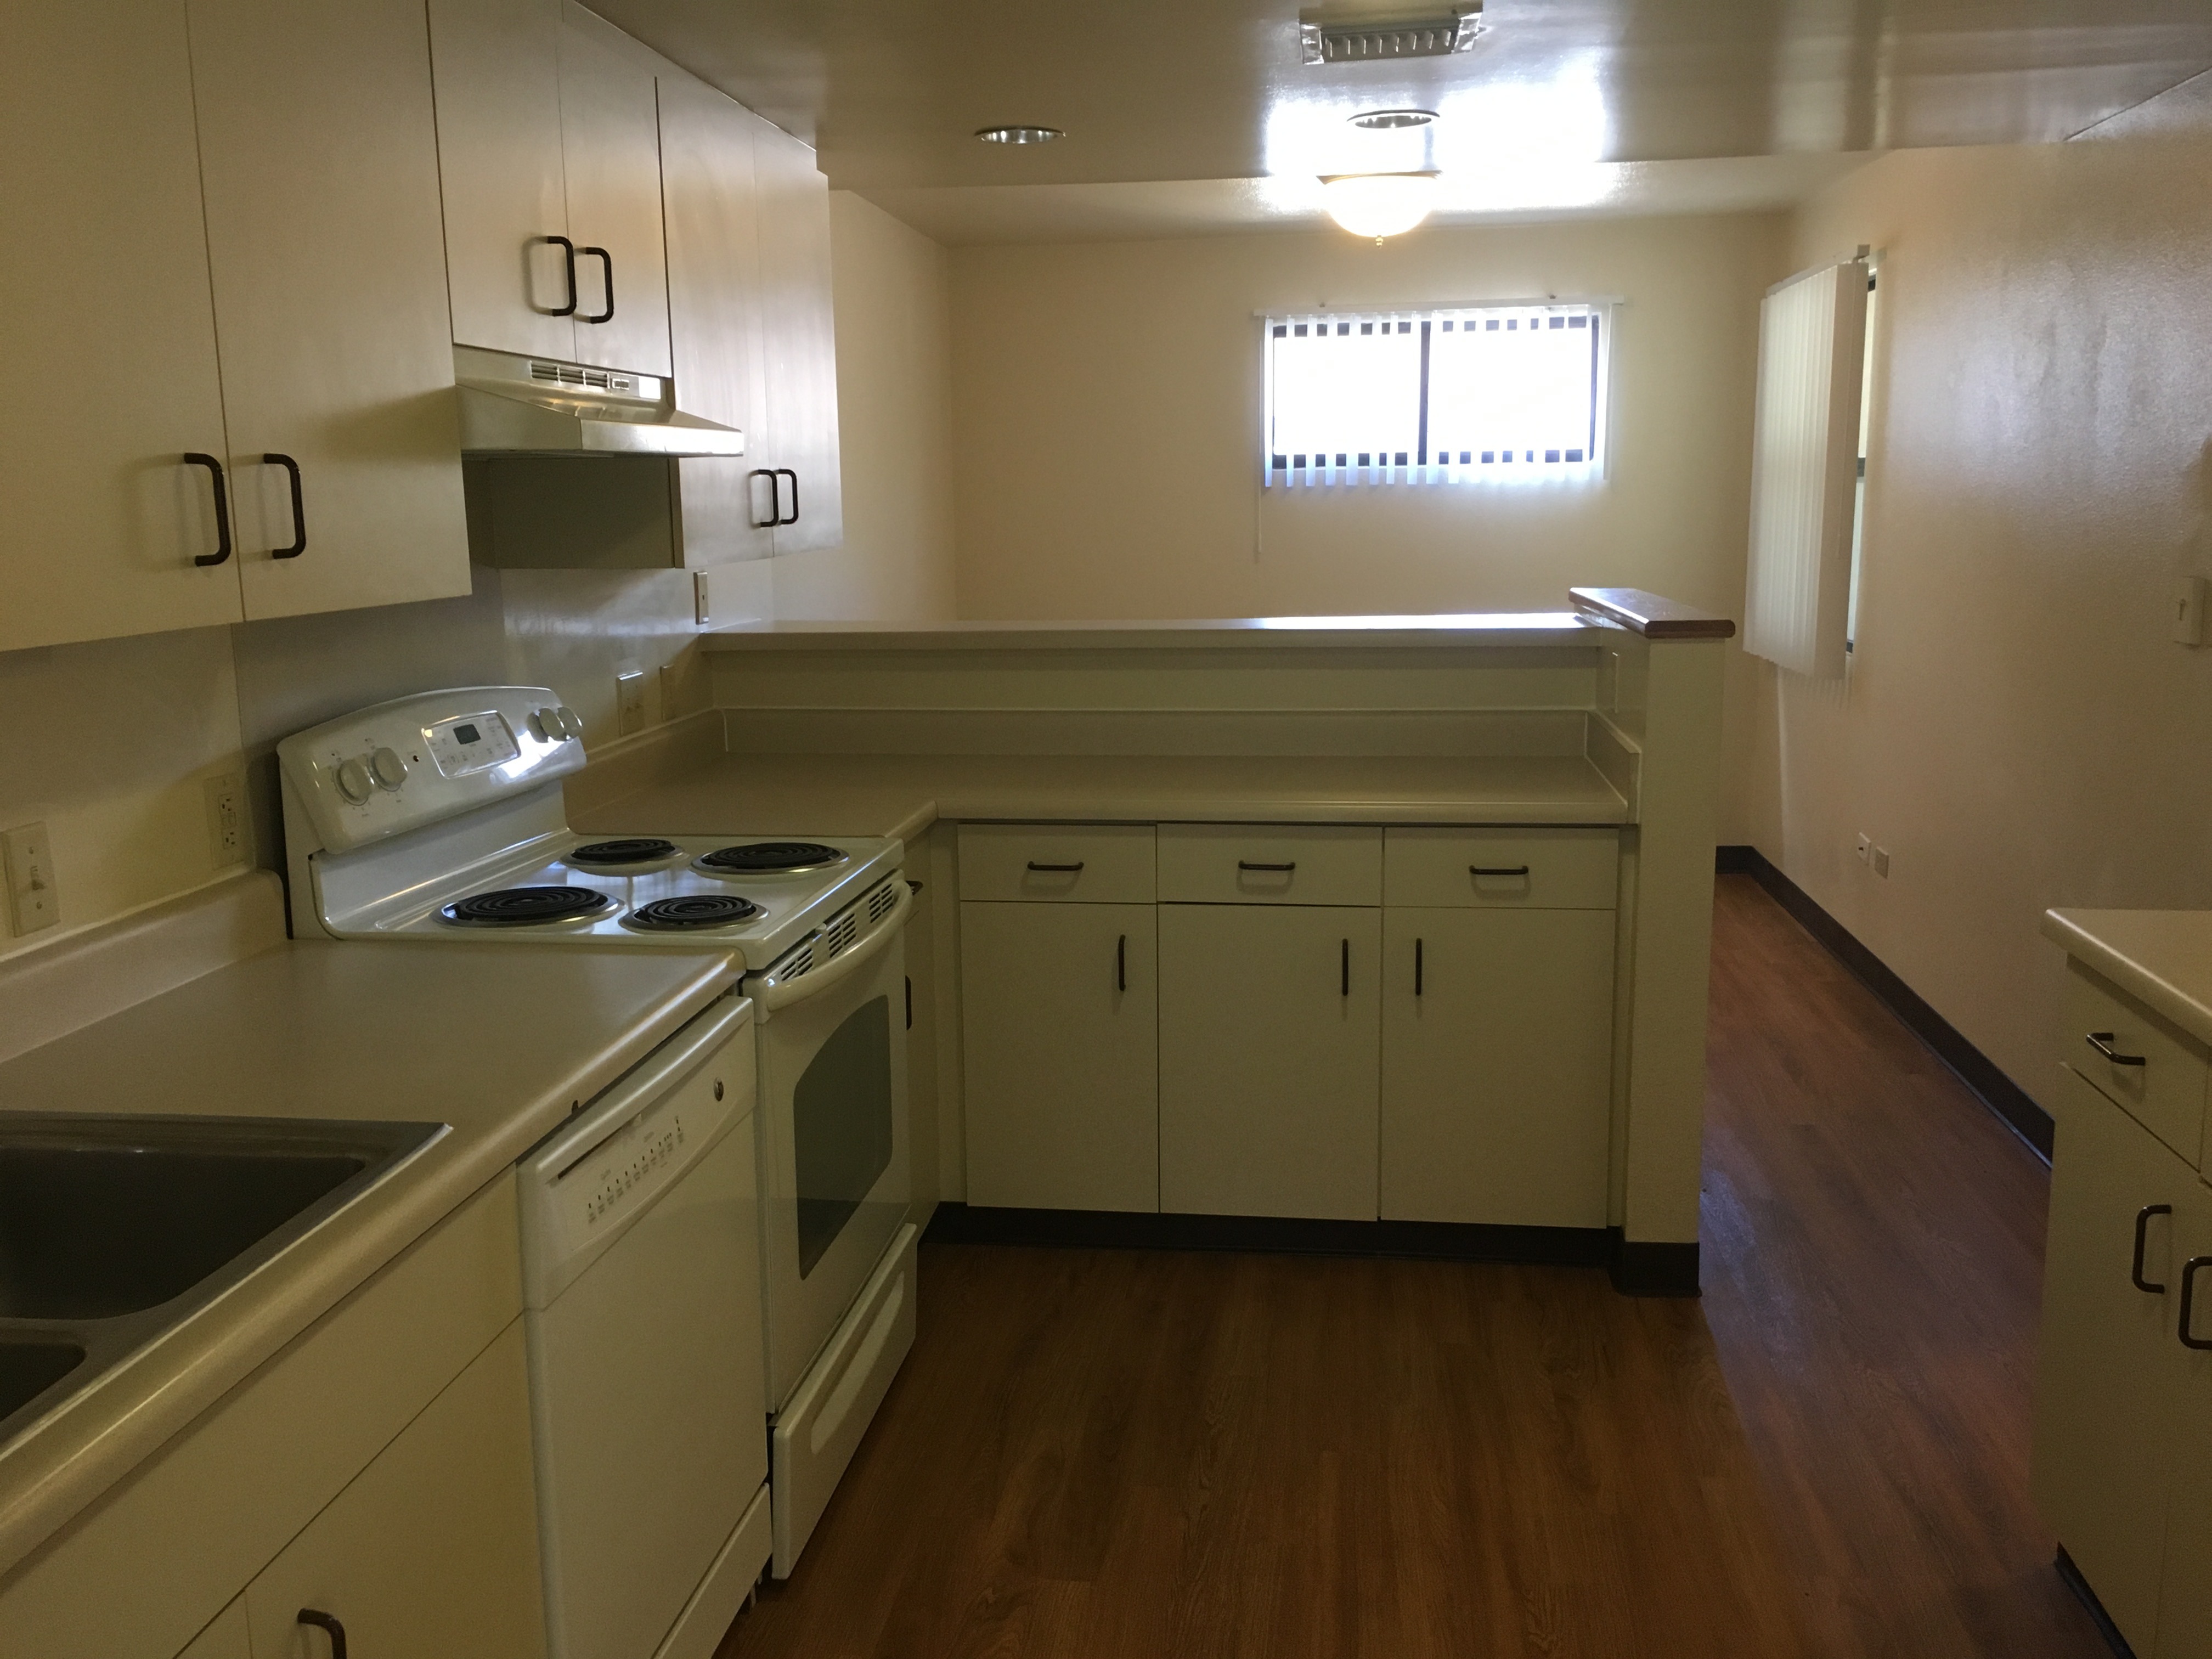 State-of-the-Art Kitchen | Hickam AFB Housing | Hickam Communities